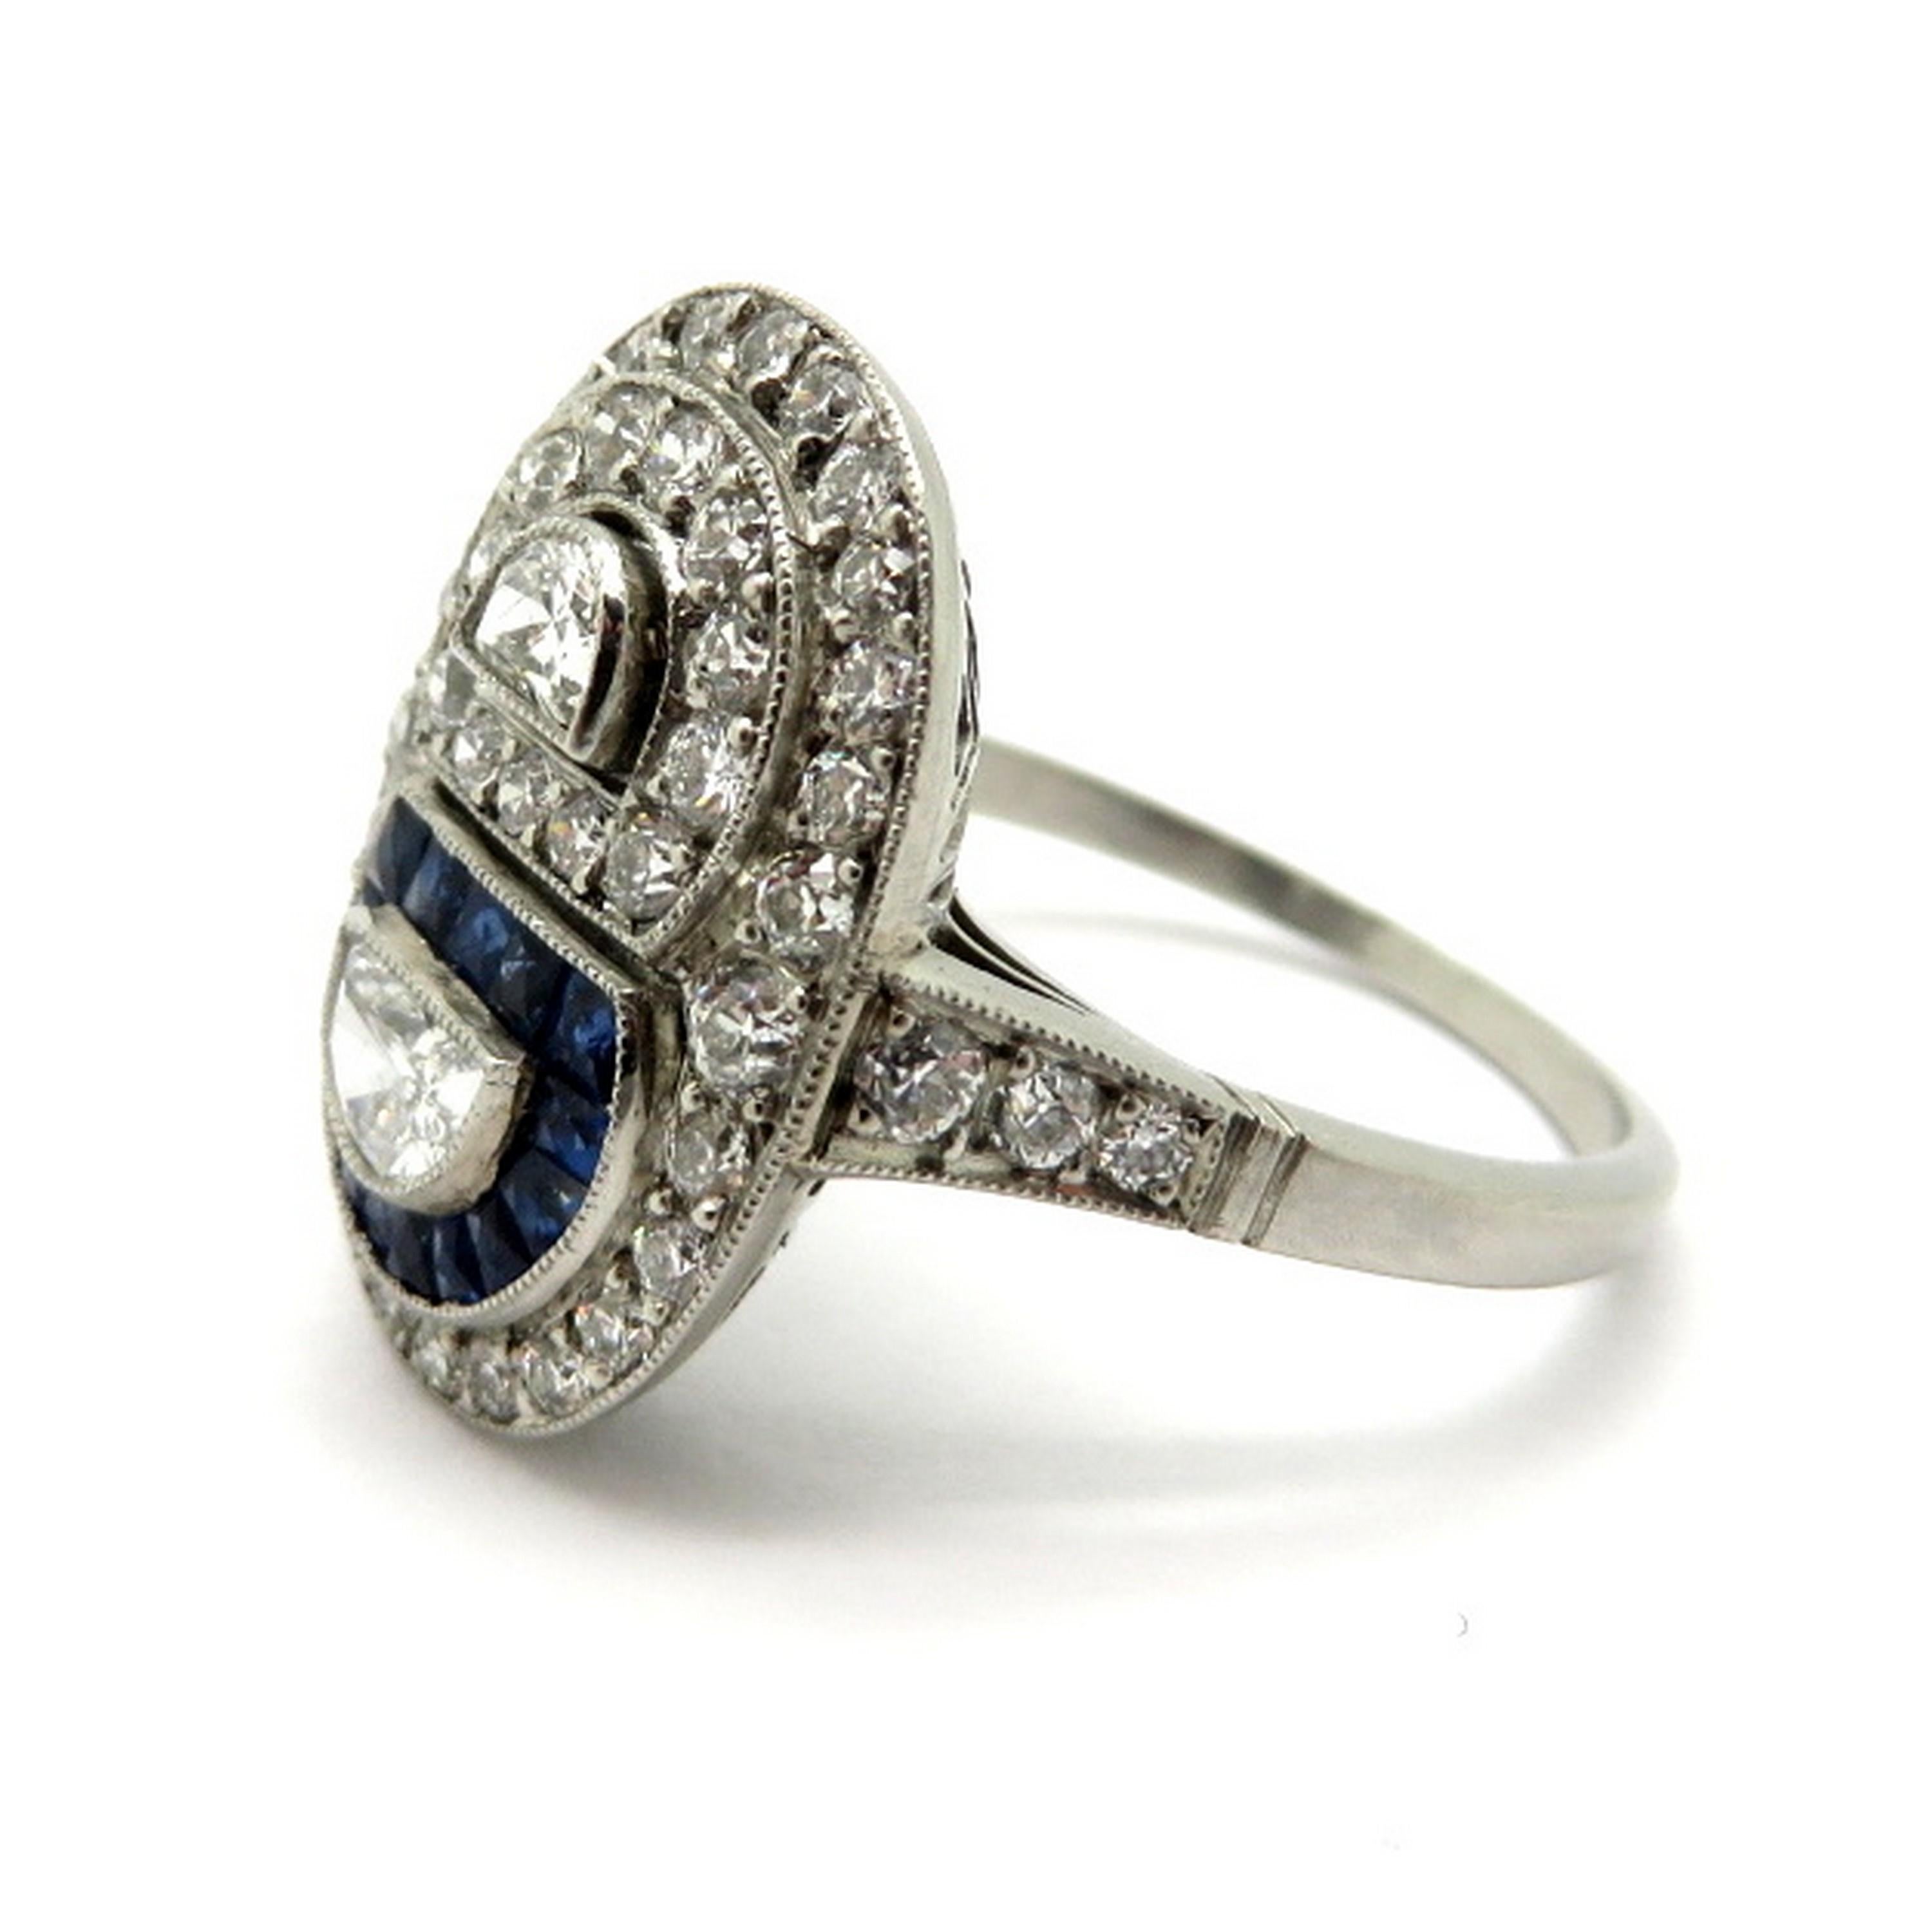 Platinum sapphire and diamond half-moon shaped Art Deco style engagement ring. Showcasing two fancy half-moon shaped diamonds, weighing a total of 0.29 carats, having H – I color grade and VS1 clarity grade. Accented with 15 fine quality natural